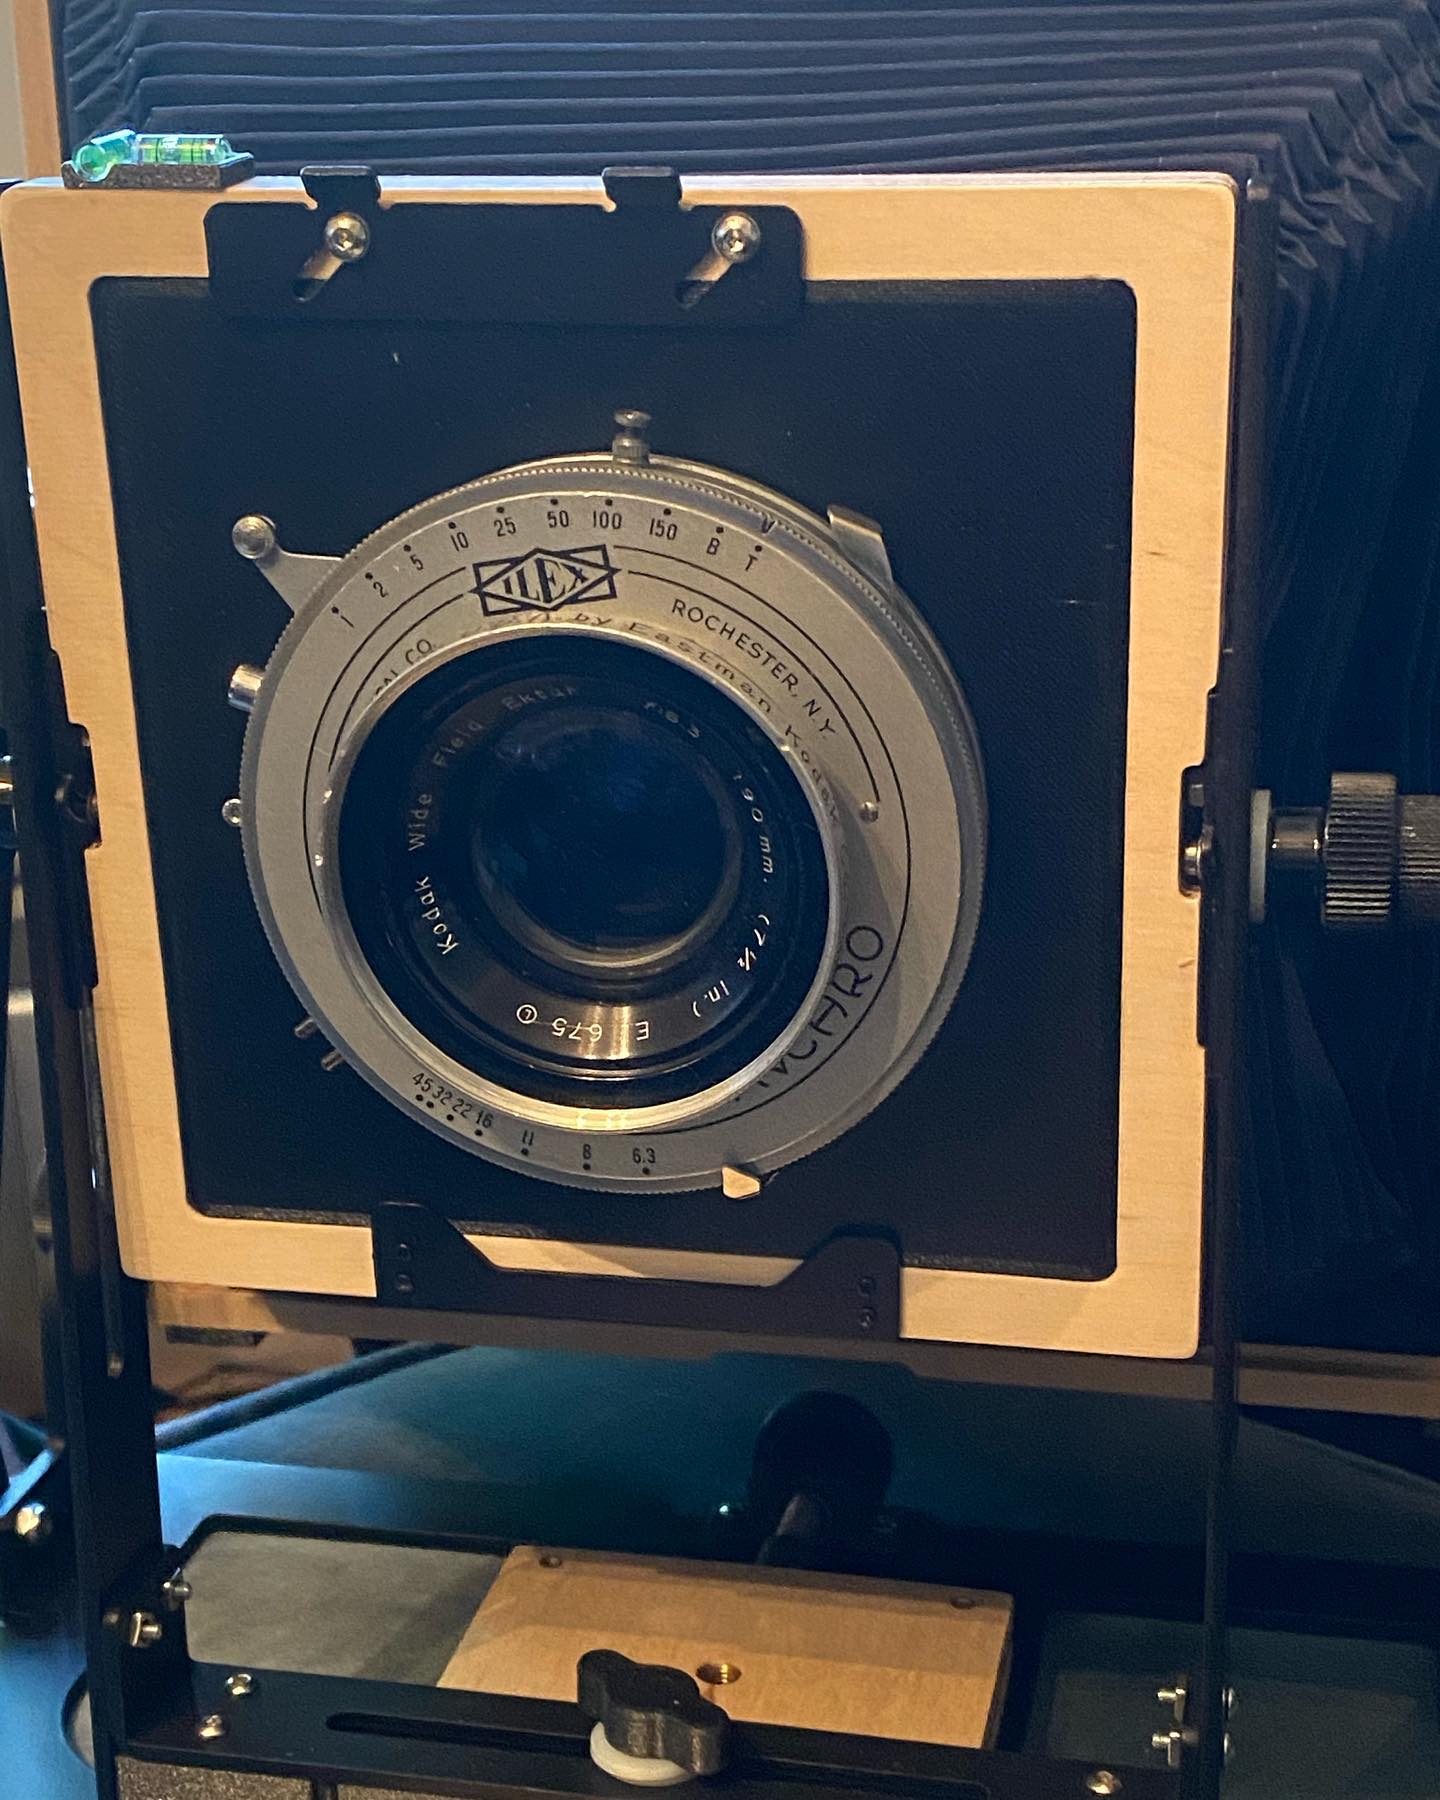 3D printed lens board for my @intrepidcamera 8x10. I had a hard time finding a board that would fit the Ilex No. 4 shutter that came with the Kodak Wide Field Ektar 190mm/f6.3 lens I picked up recently. So I opened up Fusion 360 and made one, which I then printed on my Ender 3 Pro. First attempt didnât work; the hole was based on some specs I read online and was too small, and I hadnât accounted for the rounded corners. Also it wasnât quite thick enough and so wasnât rigid enough. So back to Fusion 360, doubled the thickness to 4mm and added a circle to the back for another 2mm of support. The result looks promising. Will have to take the camera out this week and see if it worked.